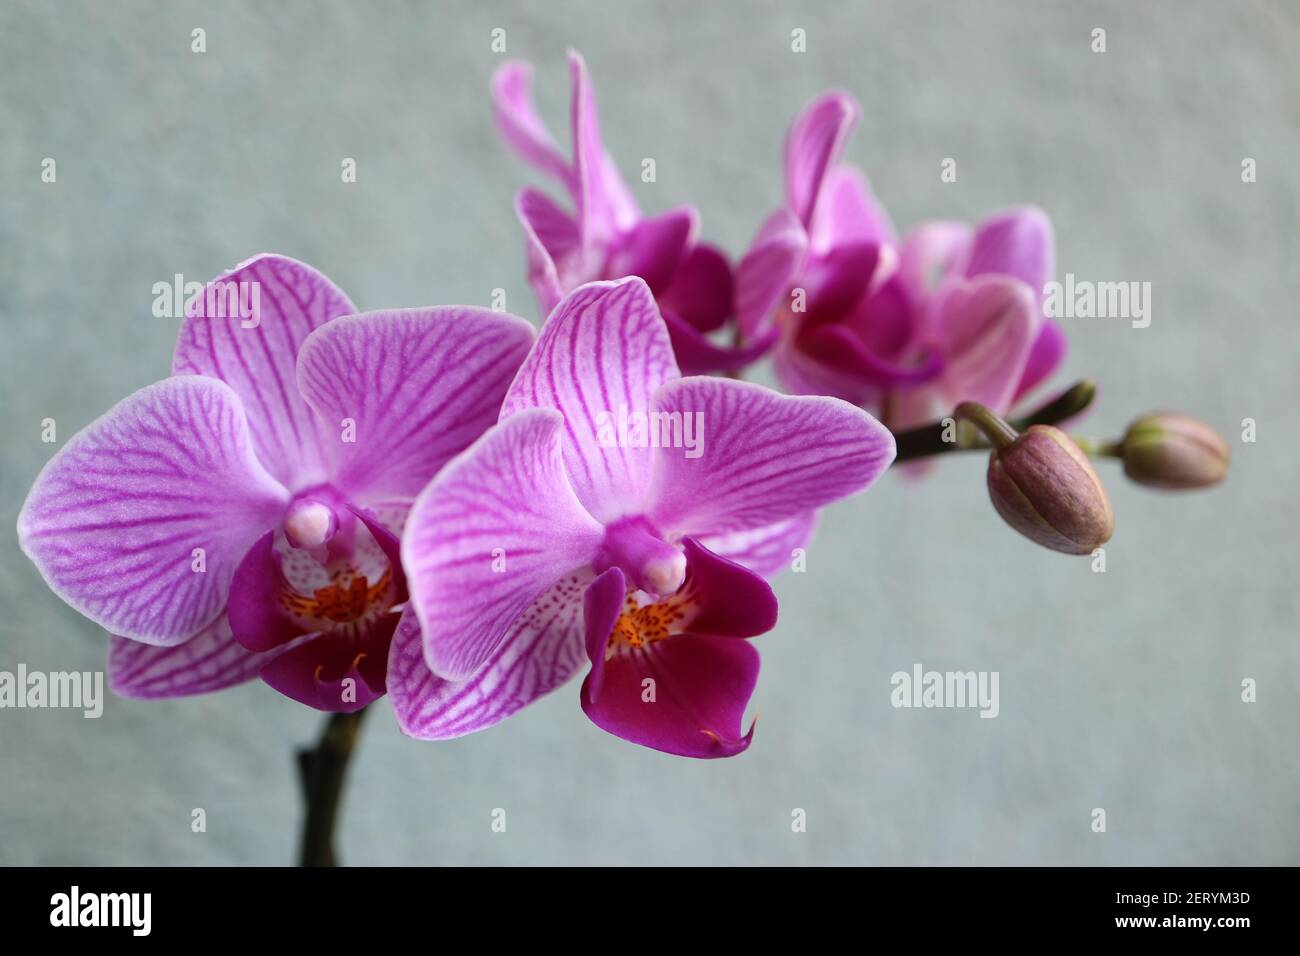 Mini purple Orchid with delicate petals , buds and petal patterns , purple orchid macro, flower branch, beauty in nature, exotic flower, macro photo Stock Photo